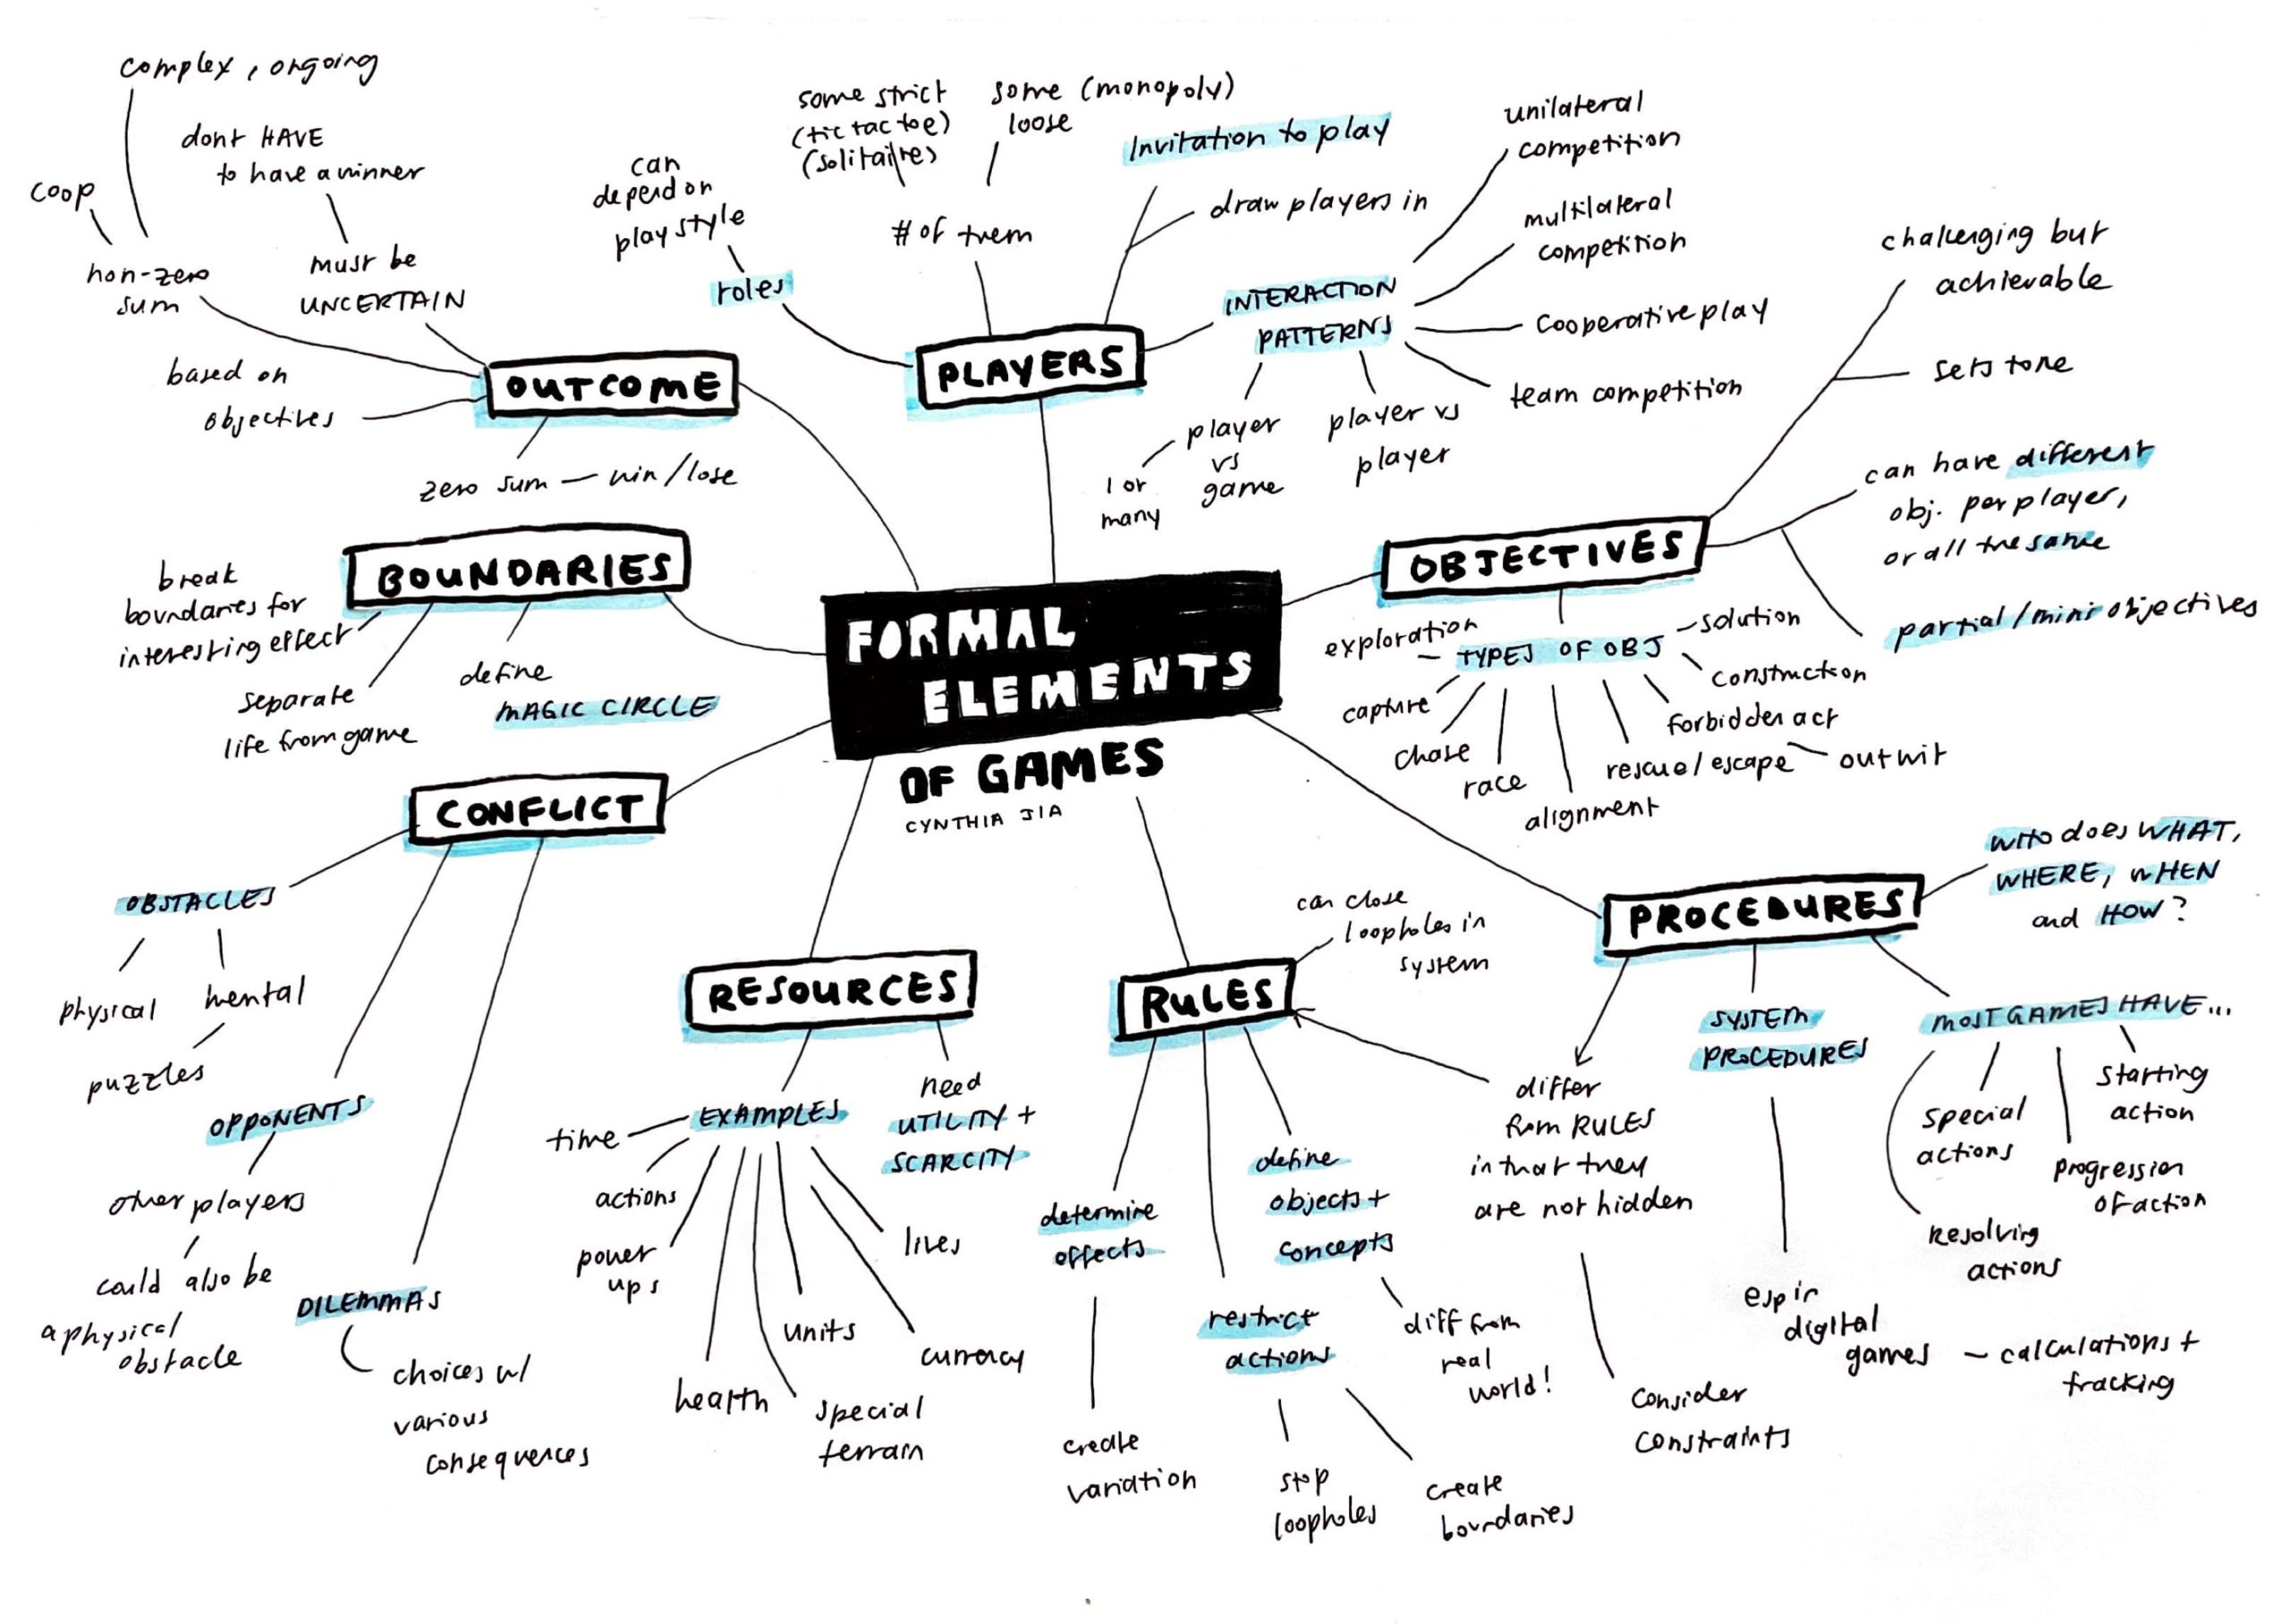 a mindmap with "formal elements of games" at the center, and many key ideas branching from the center